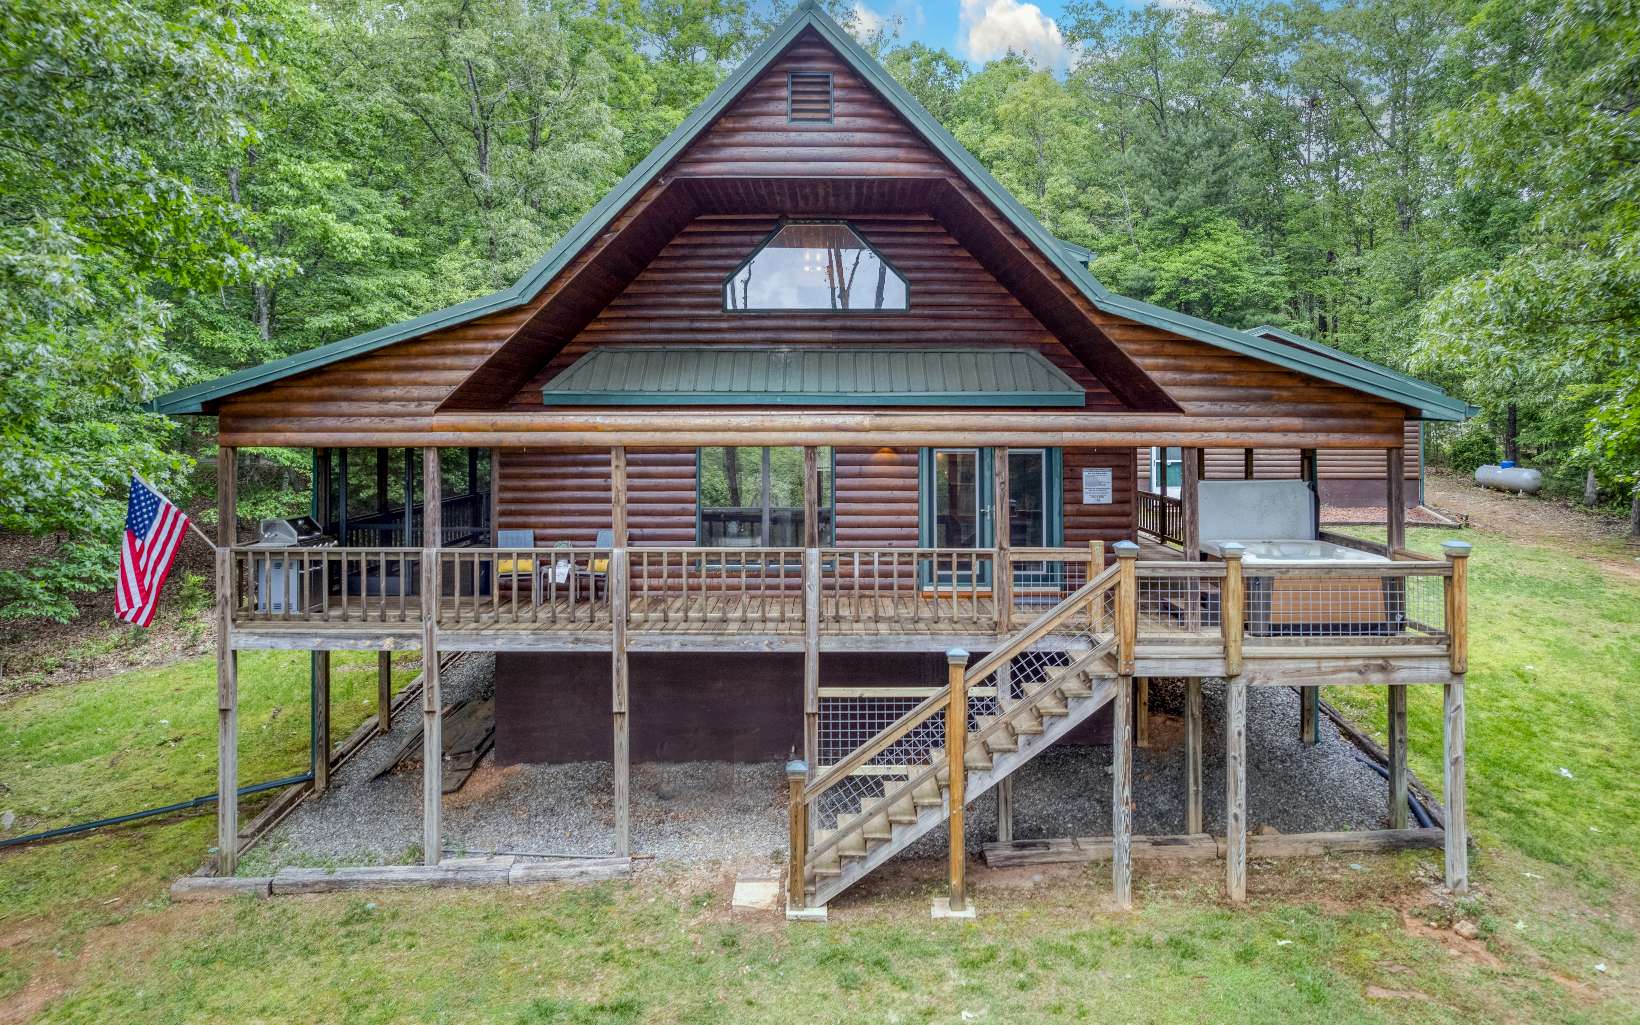 This fully furnished cabin is as cozy as gets and comes with an impeccable view, 3 large private bedrooms, 2 full baths with beautiful showers and a soaking tub!! 2 bedrooms have brand new 42" smart TVs already mounted. Enjoy entertaining in one of the many luxurious spaces this home has to offer. Get the vacation started on the deck while relaxing in the bed swing or hot tub overlooking the views! Relax with a refreshing beverage from the fridge in the huge chef's kitchen with tons of storage, beautiful granite, and subway tile. Enjoy a hot beverage while staying warm by the fire-pit! New paint throughout the home as well as an added on cell phone service booster and a Generac generator that can power the whole house. When it's time to unwind this is the perfect place to be. Park in your oversized, detached workshop/garage or on the HUGE circular driveway. Haven at Thomas Mountain is privately tucked away only 15 min from downtown Blue Ridge, Lake Blue Ridge Marina and Aska Adventure Area! Perfect Turnkey Rental!